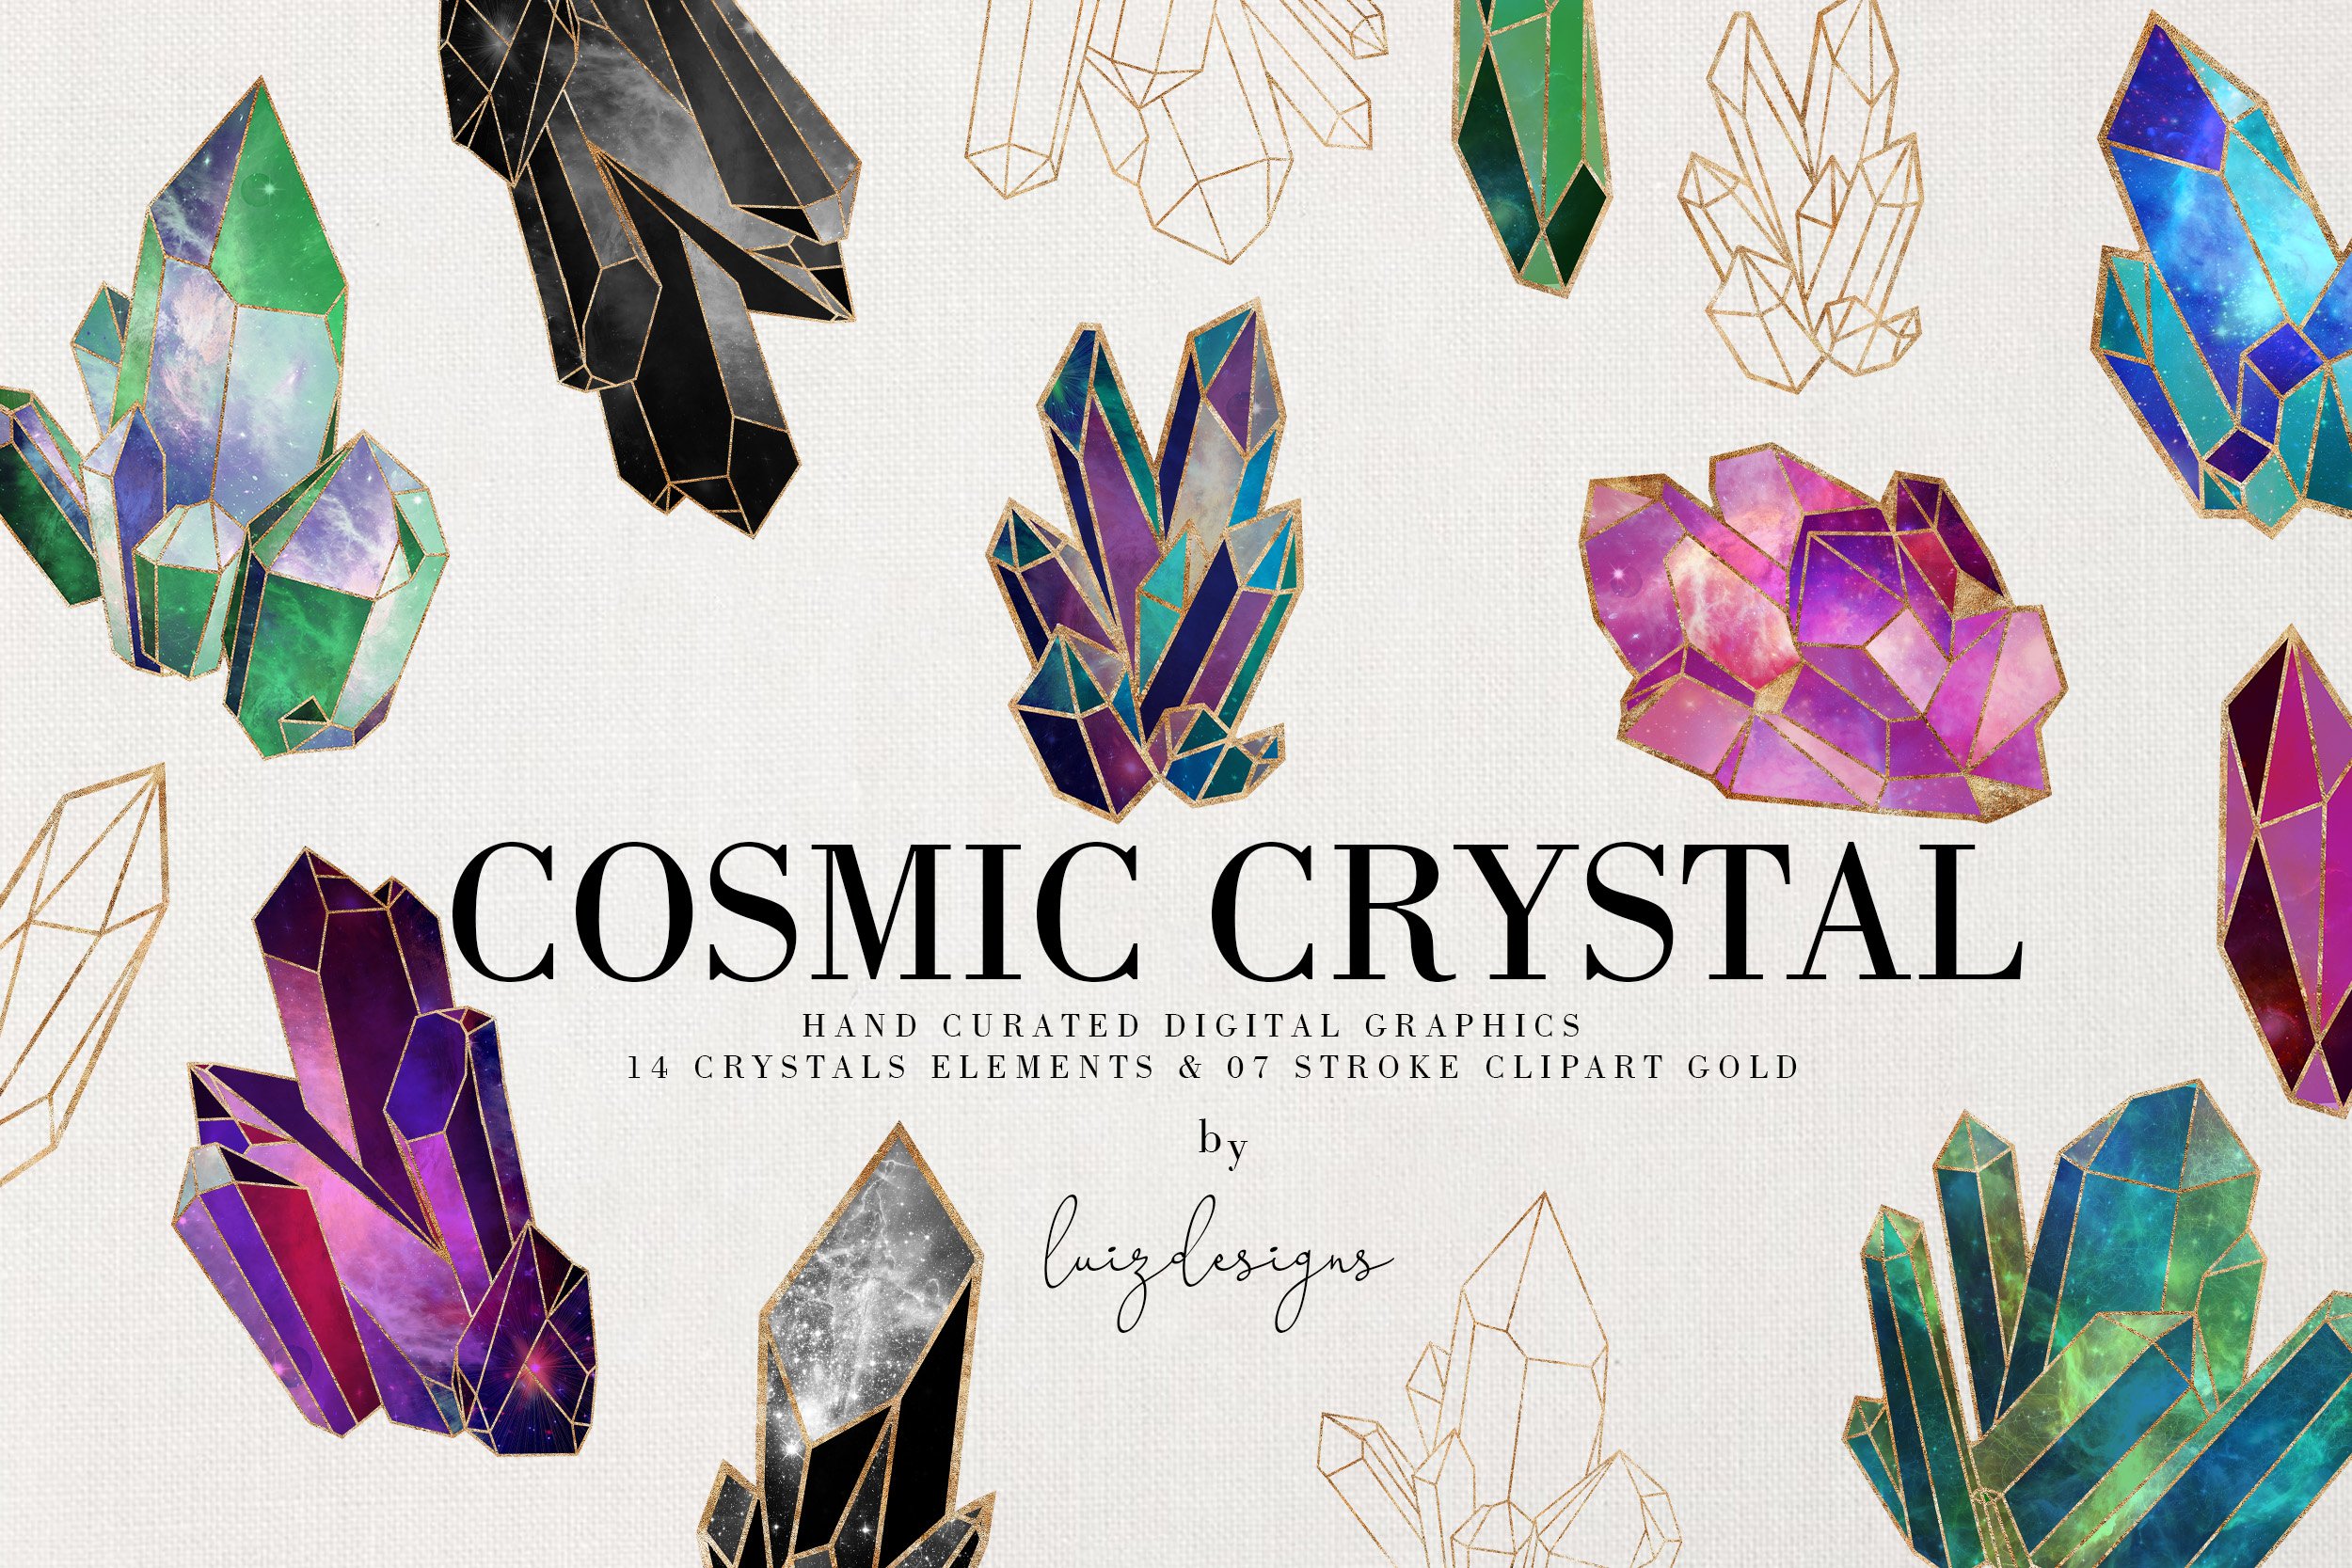 Cosmic Crystals cover image.